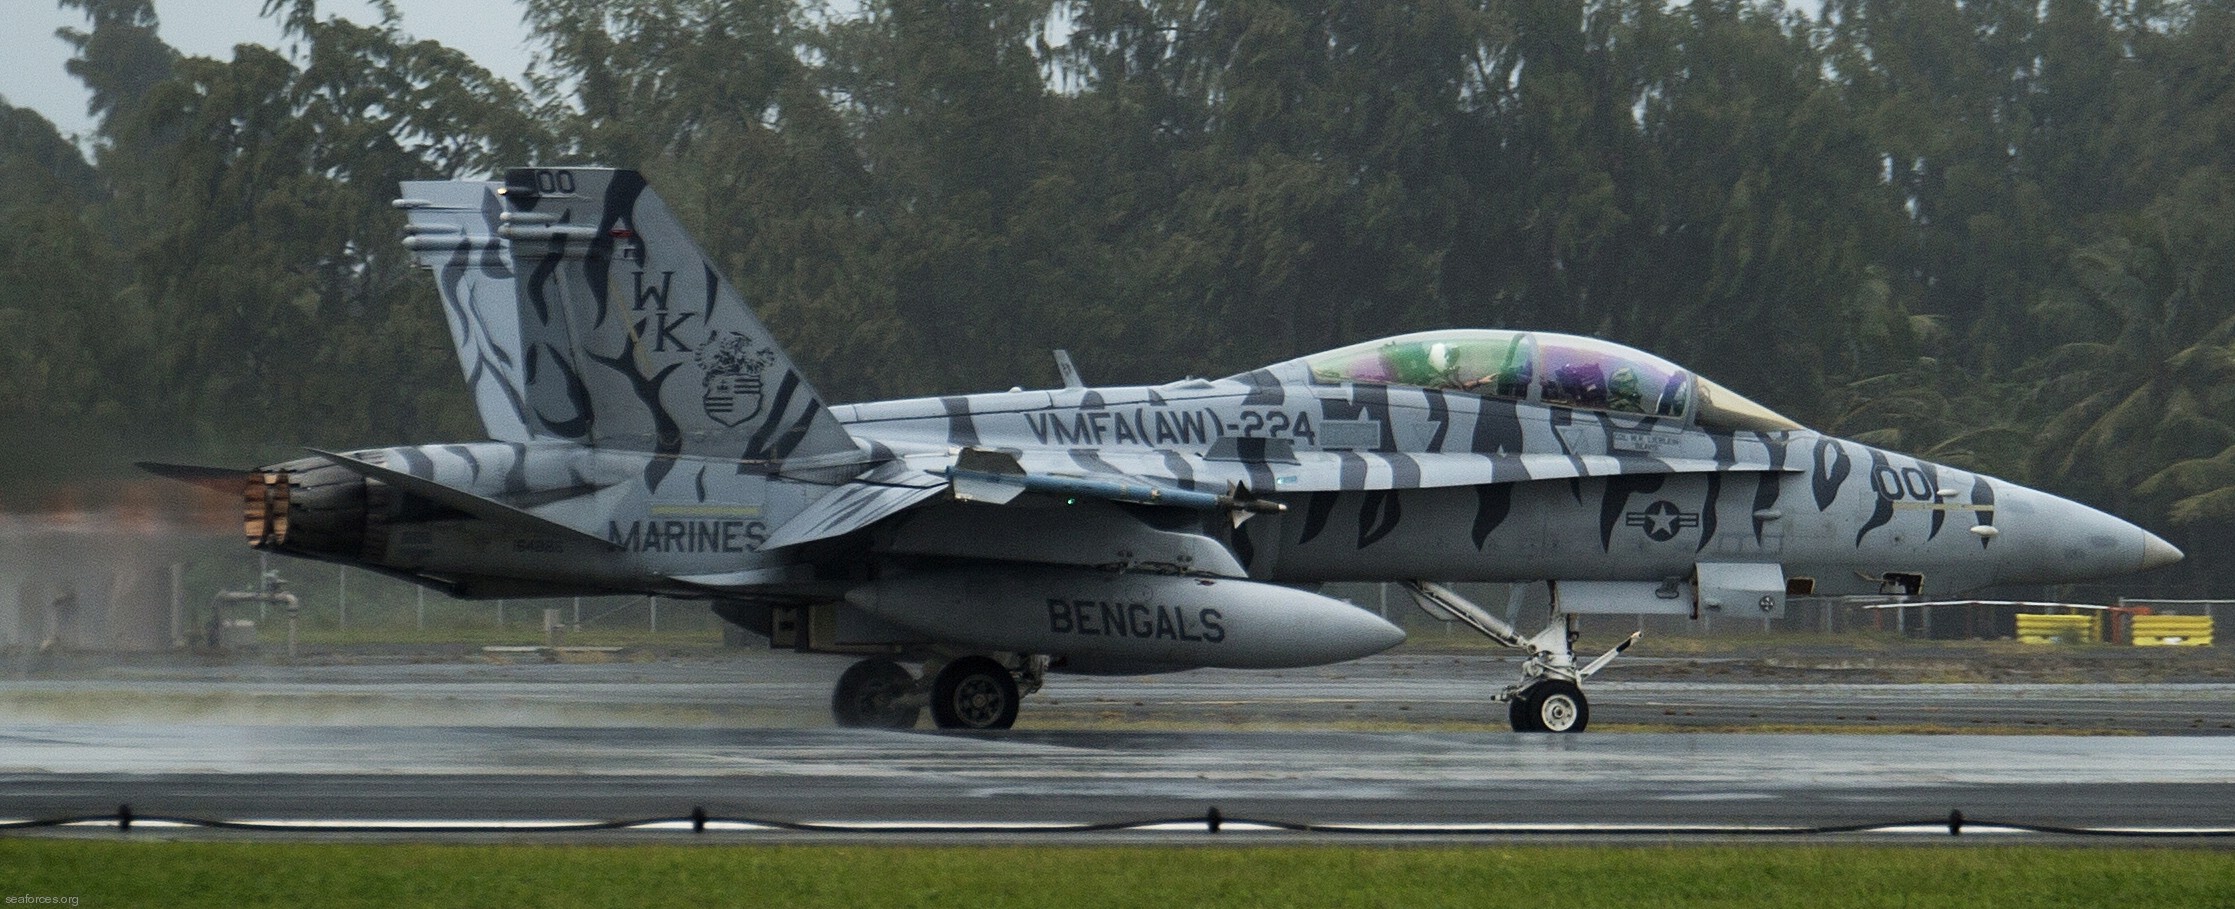 vmfa(aw)-224 bengals marine fighter attack squadron usmc f/a-18d hornet 22